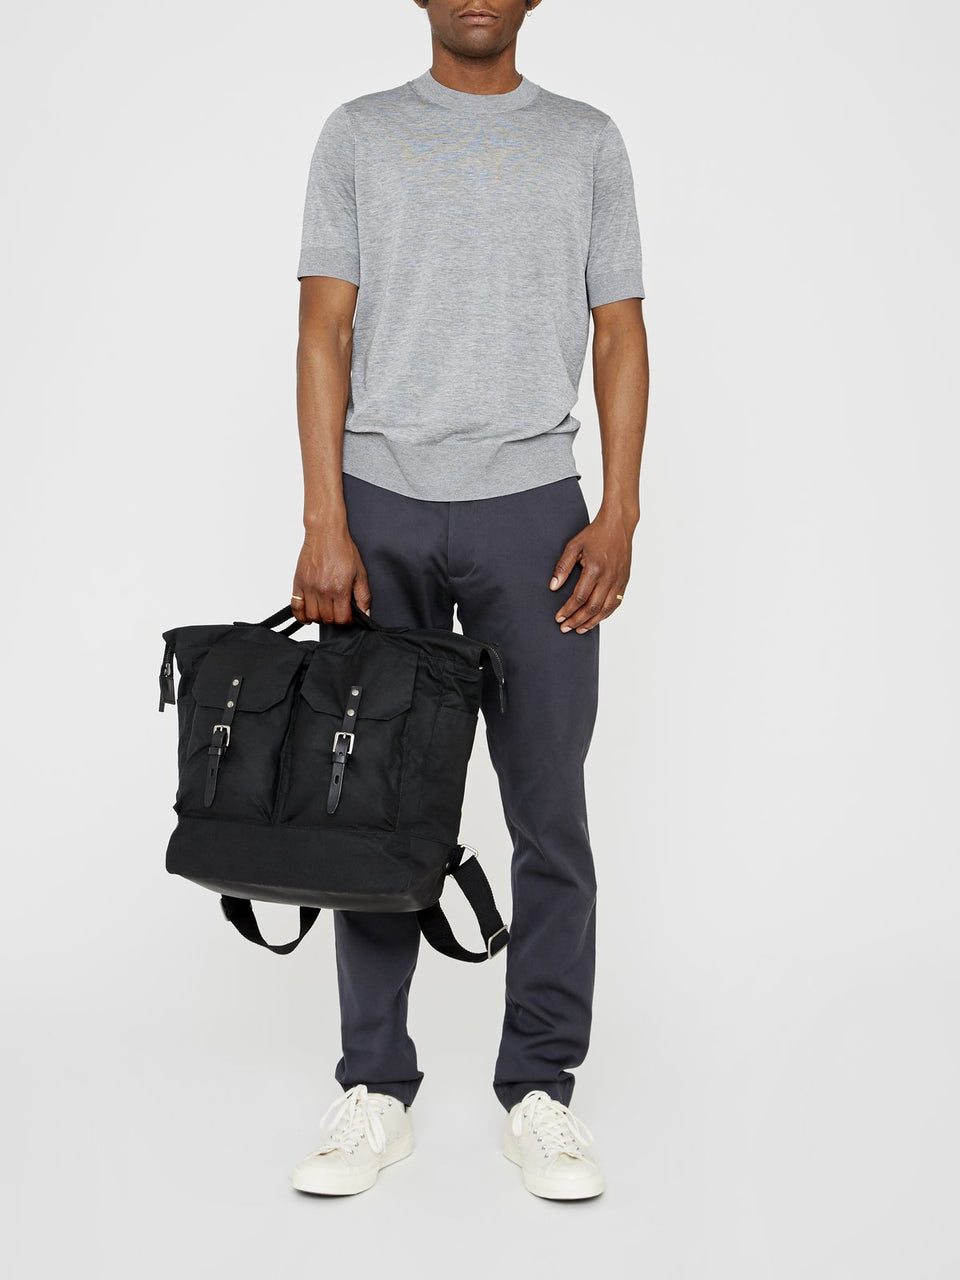 Frank Large Waxed Cotton Rucksack in Brick